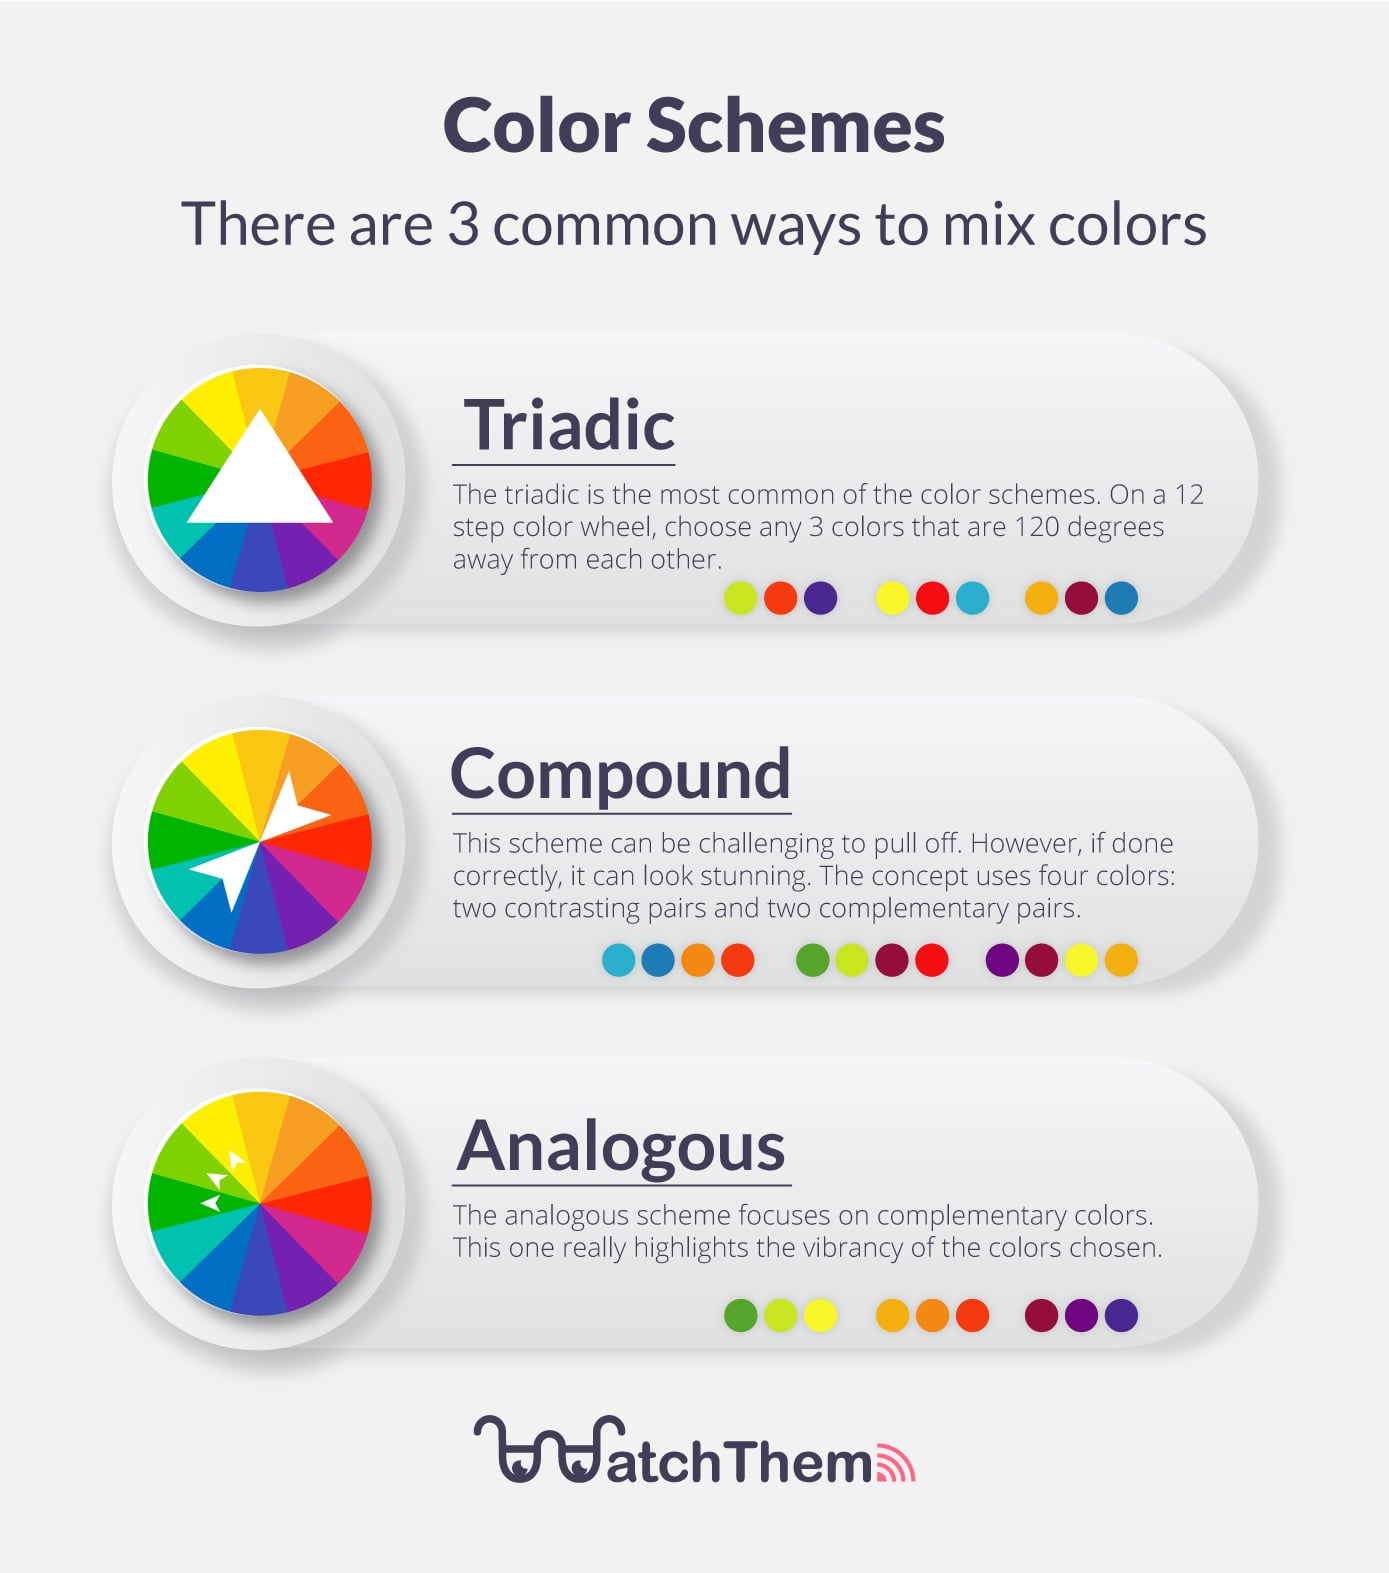 Three common ways of making a color scheme: Triadic, Compound, and Analogous